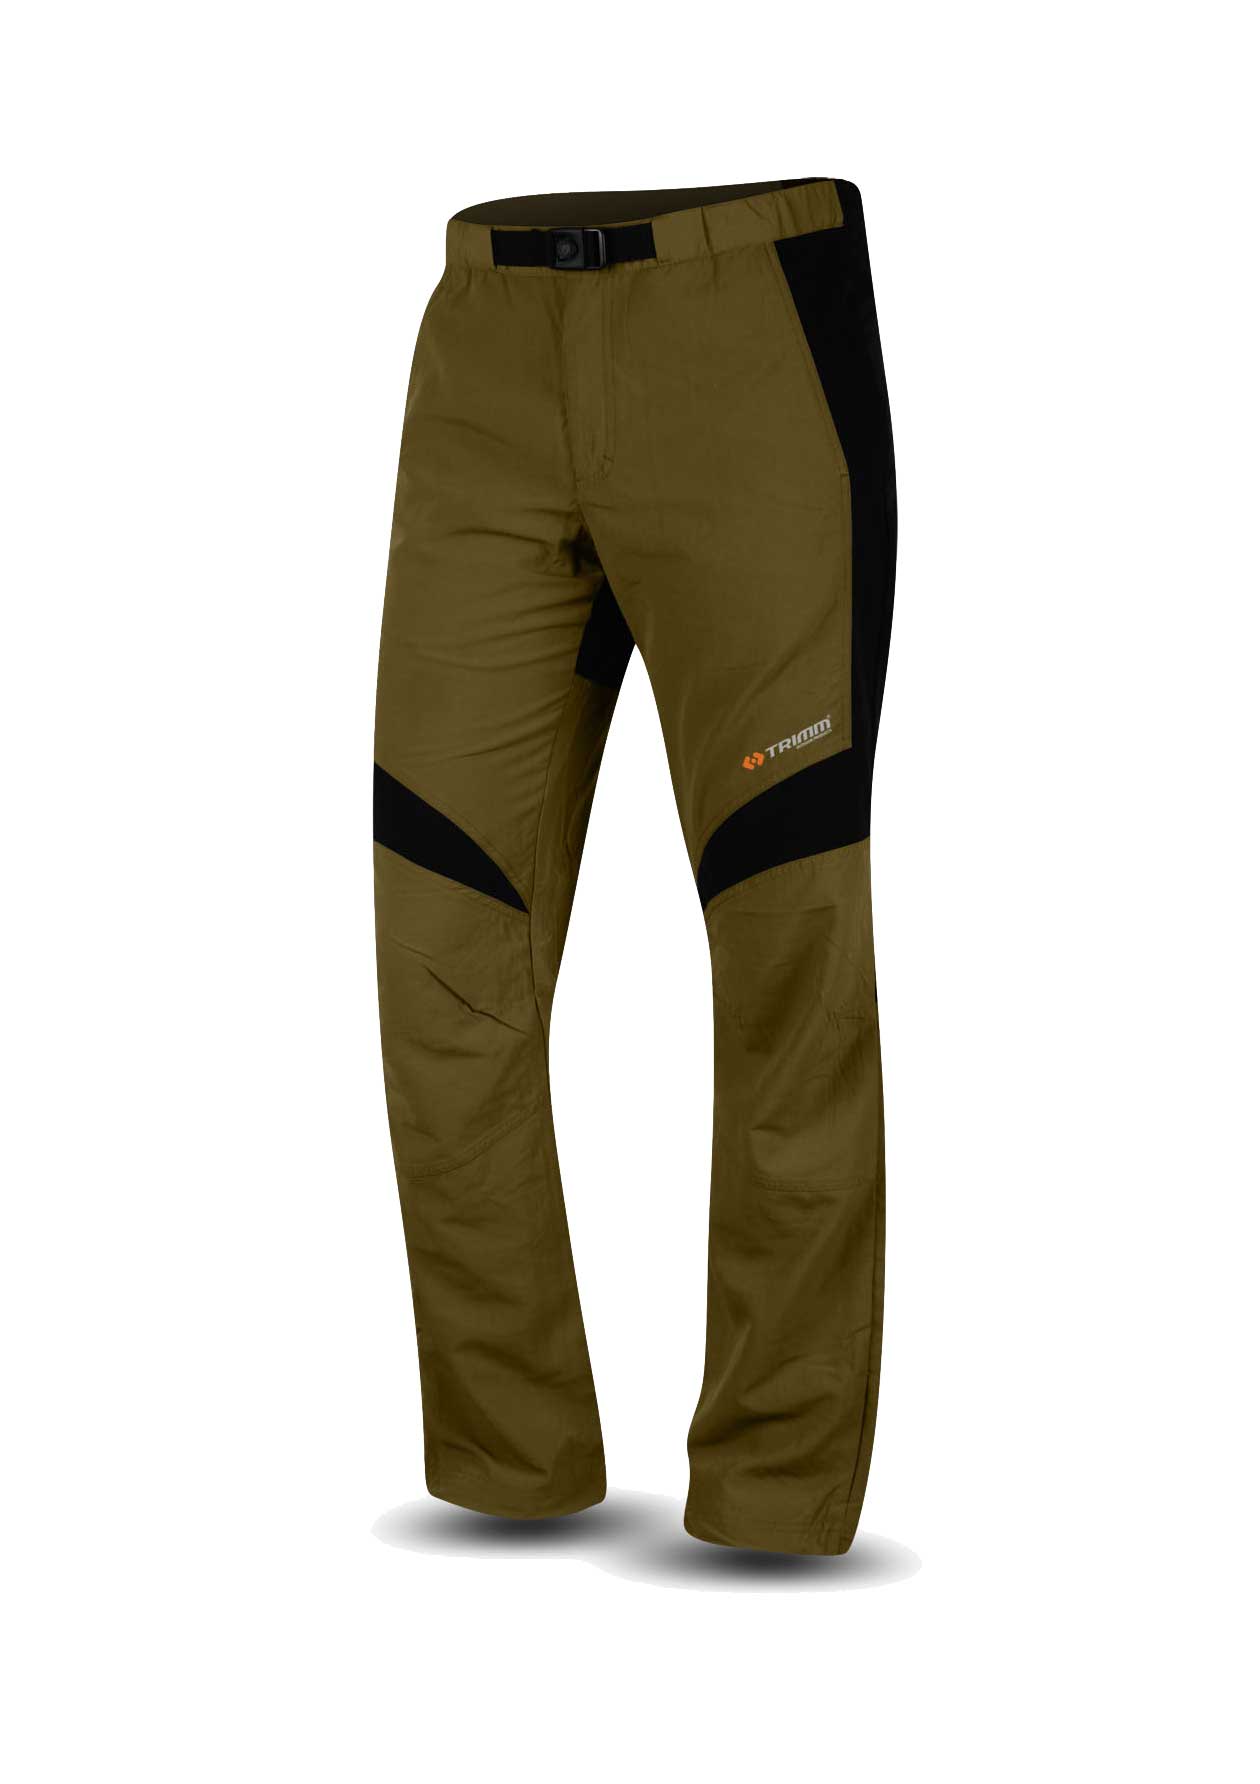 Trekking Accessories,Trousers,Direct